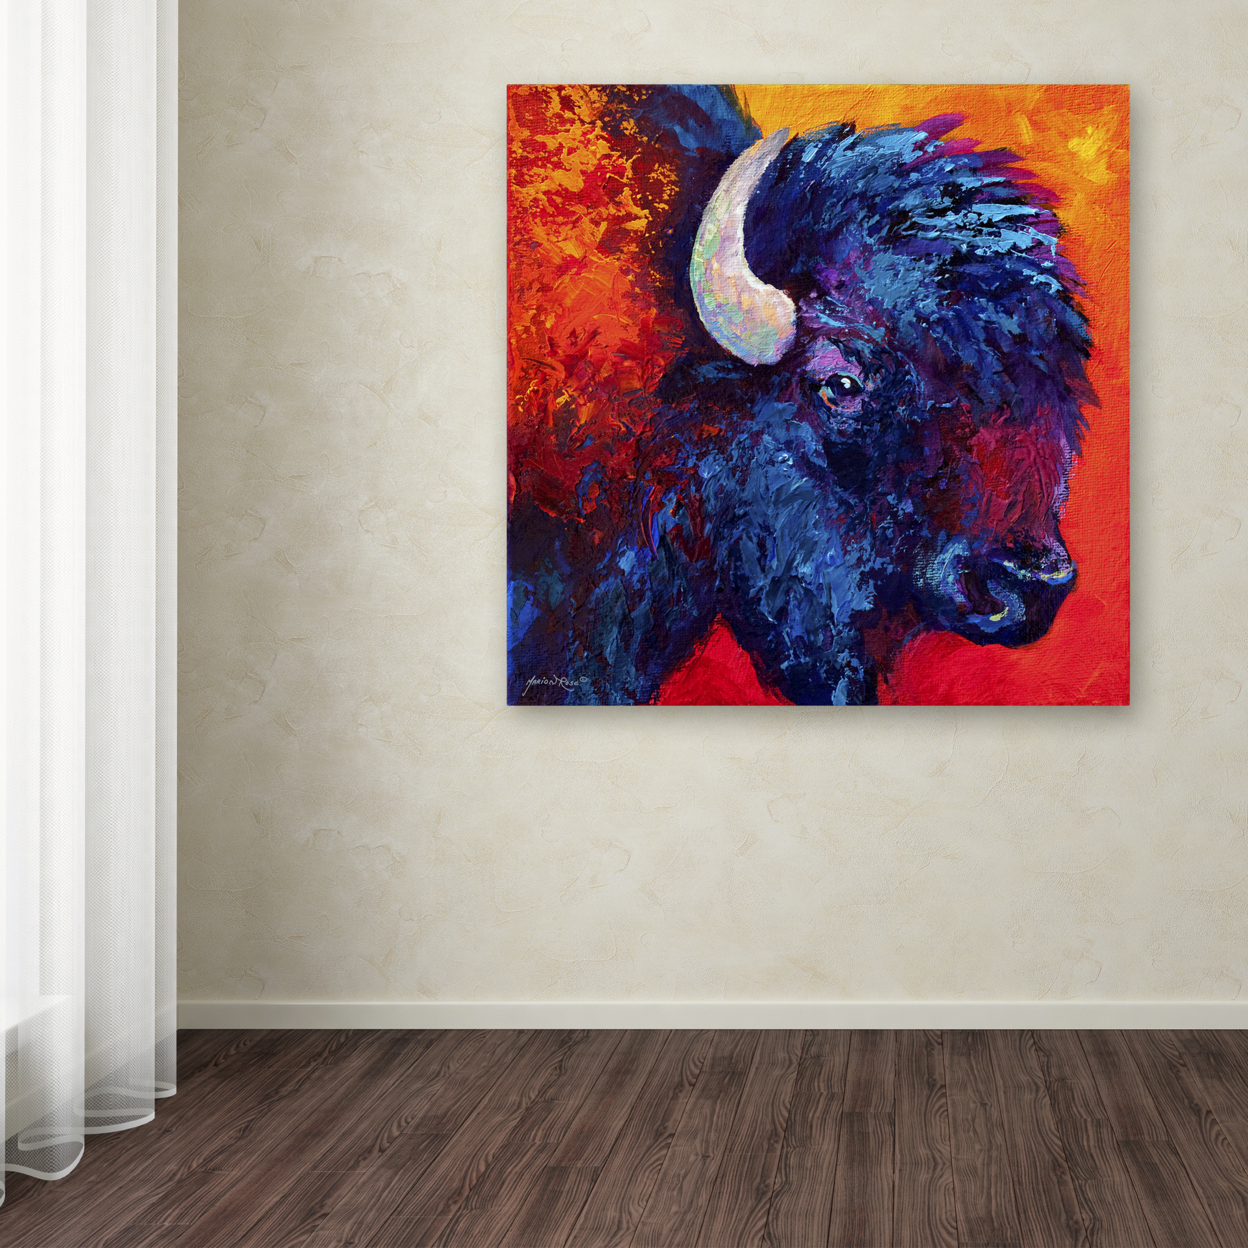 Marion Rose 'Bison Head II' Ready To Hang Canvas Art 35 X 35 Inches Made In USA